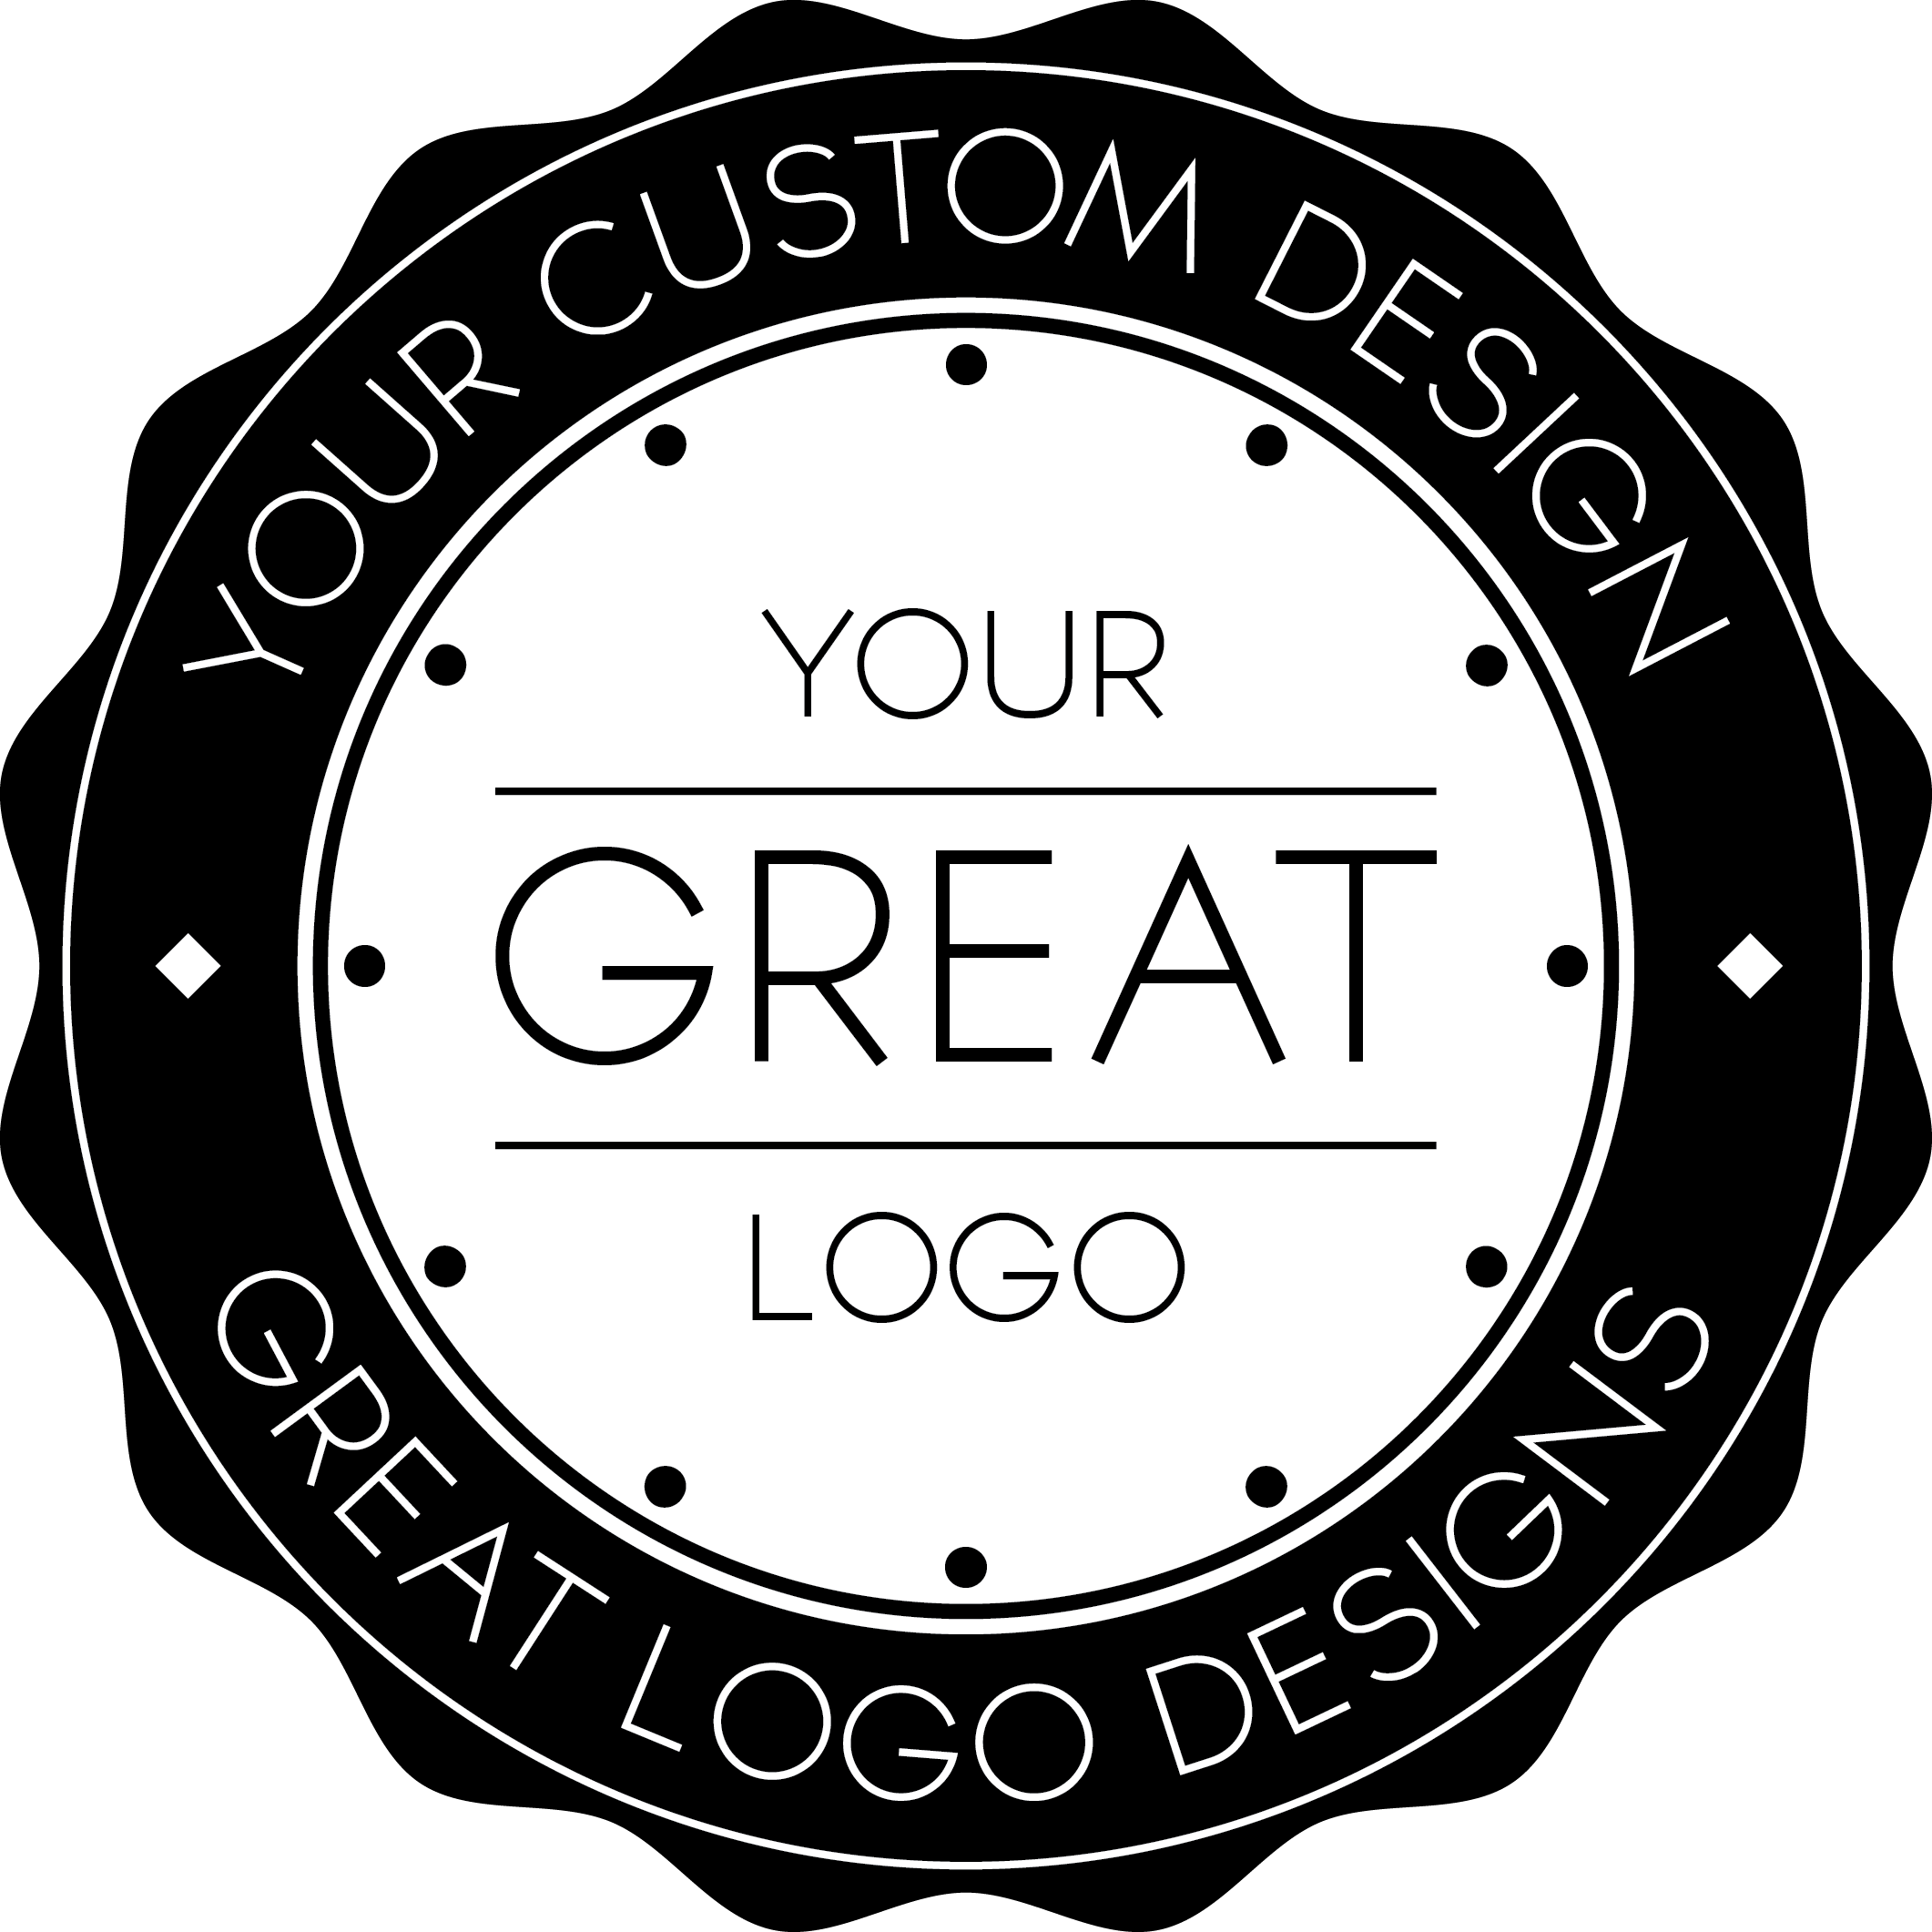 Class Logo - Duplicating Objects & Wrapping Text Around Circular Logos in ...